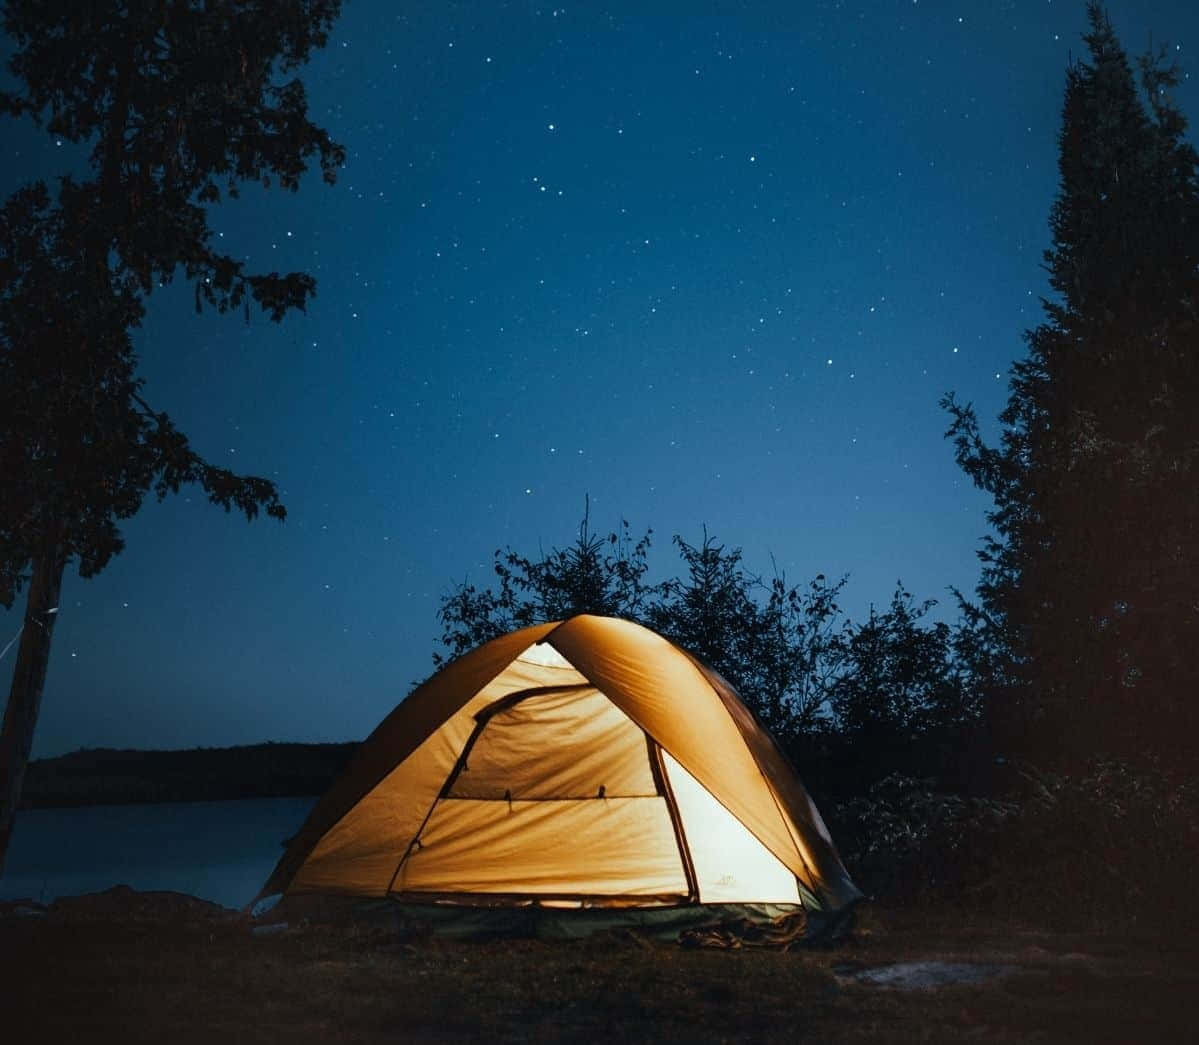 Enjoy the beauty of nature camping in the great outdoors